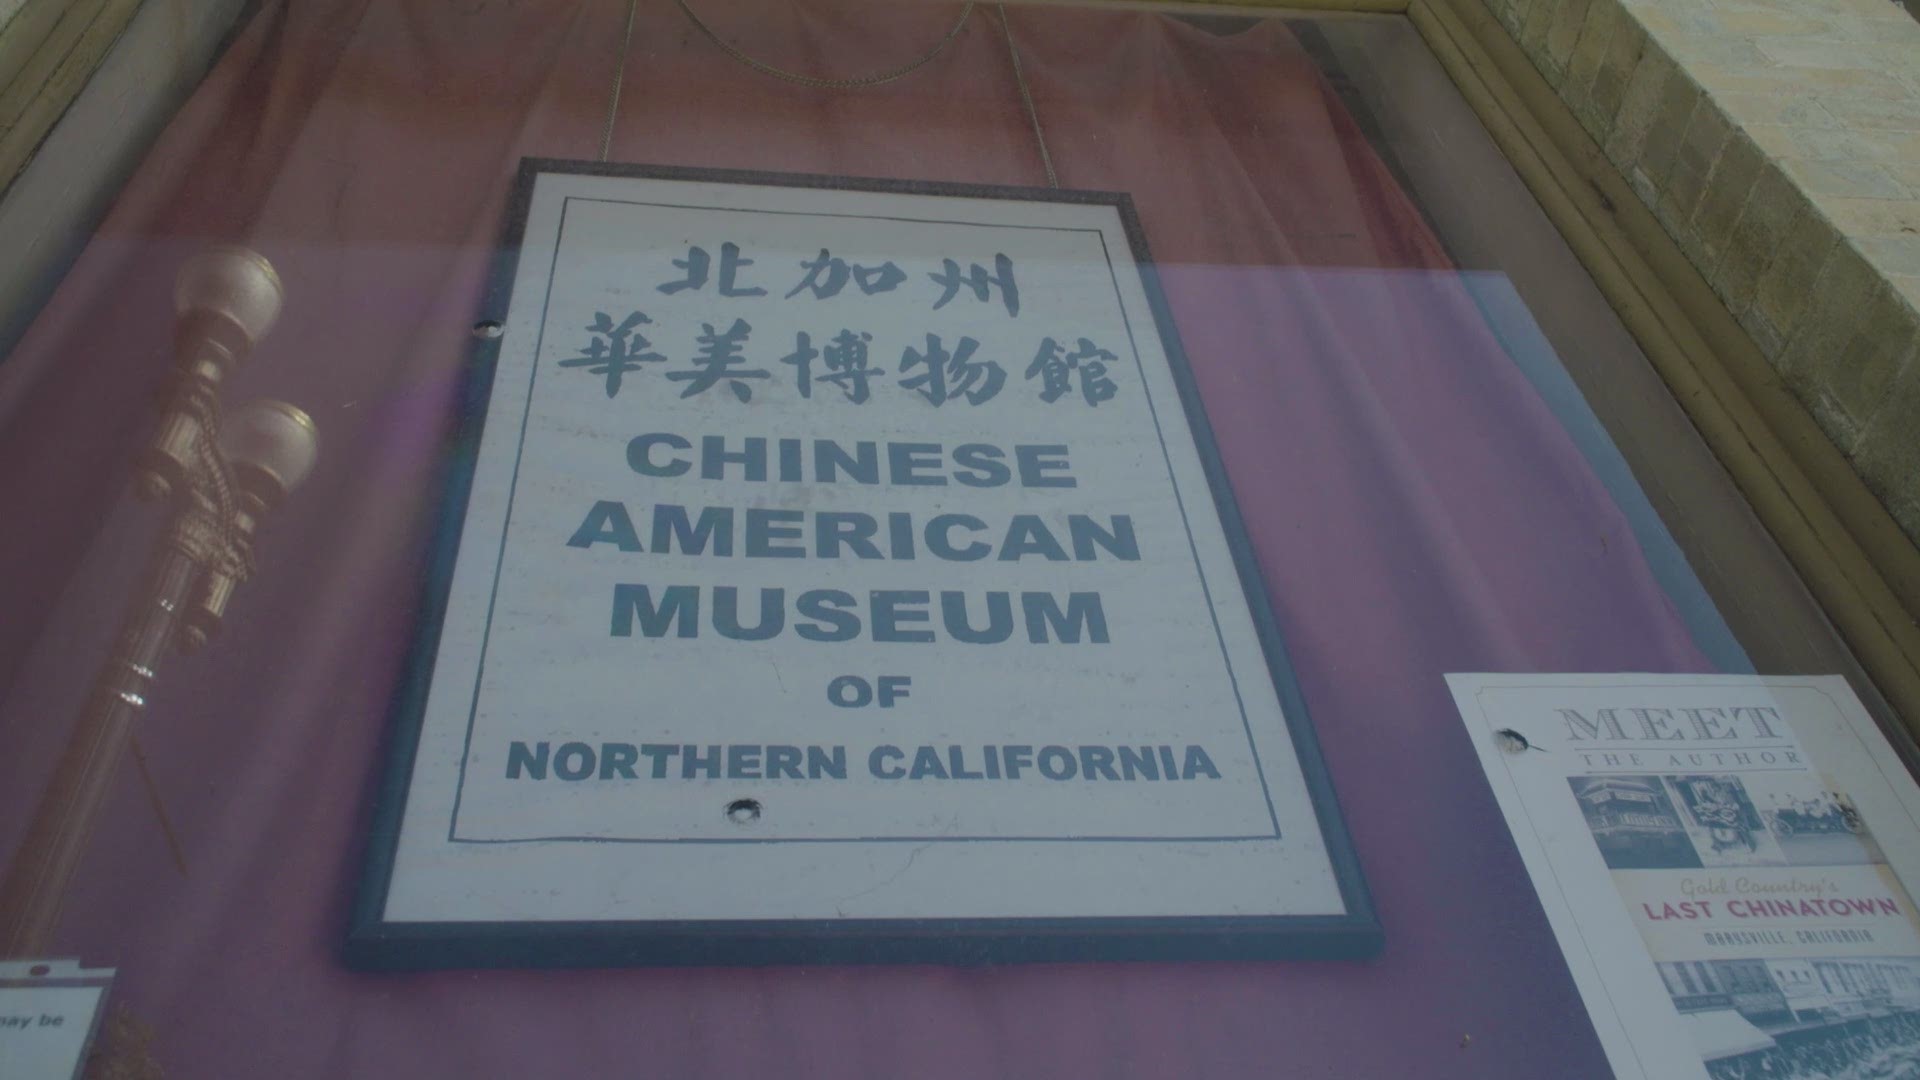 The founder of The Chinese American Museum of Northern CA looks to broaden the narrative around Chinese American history. And it begins with the Gold Rush.